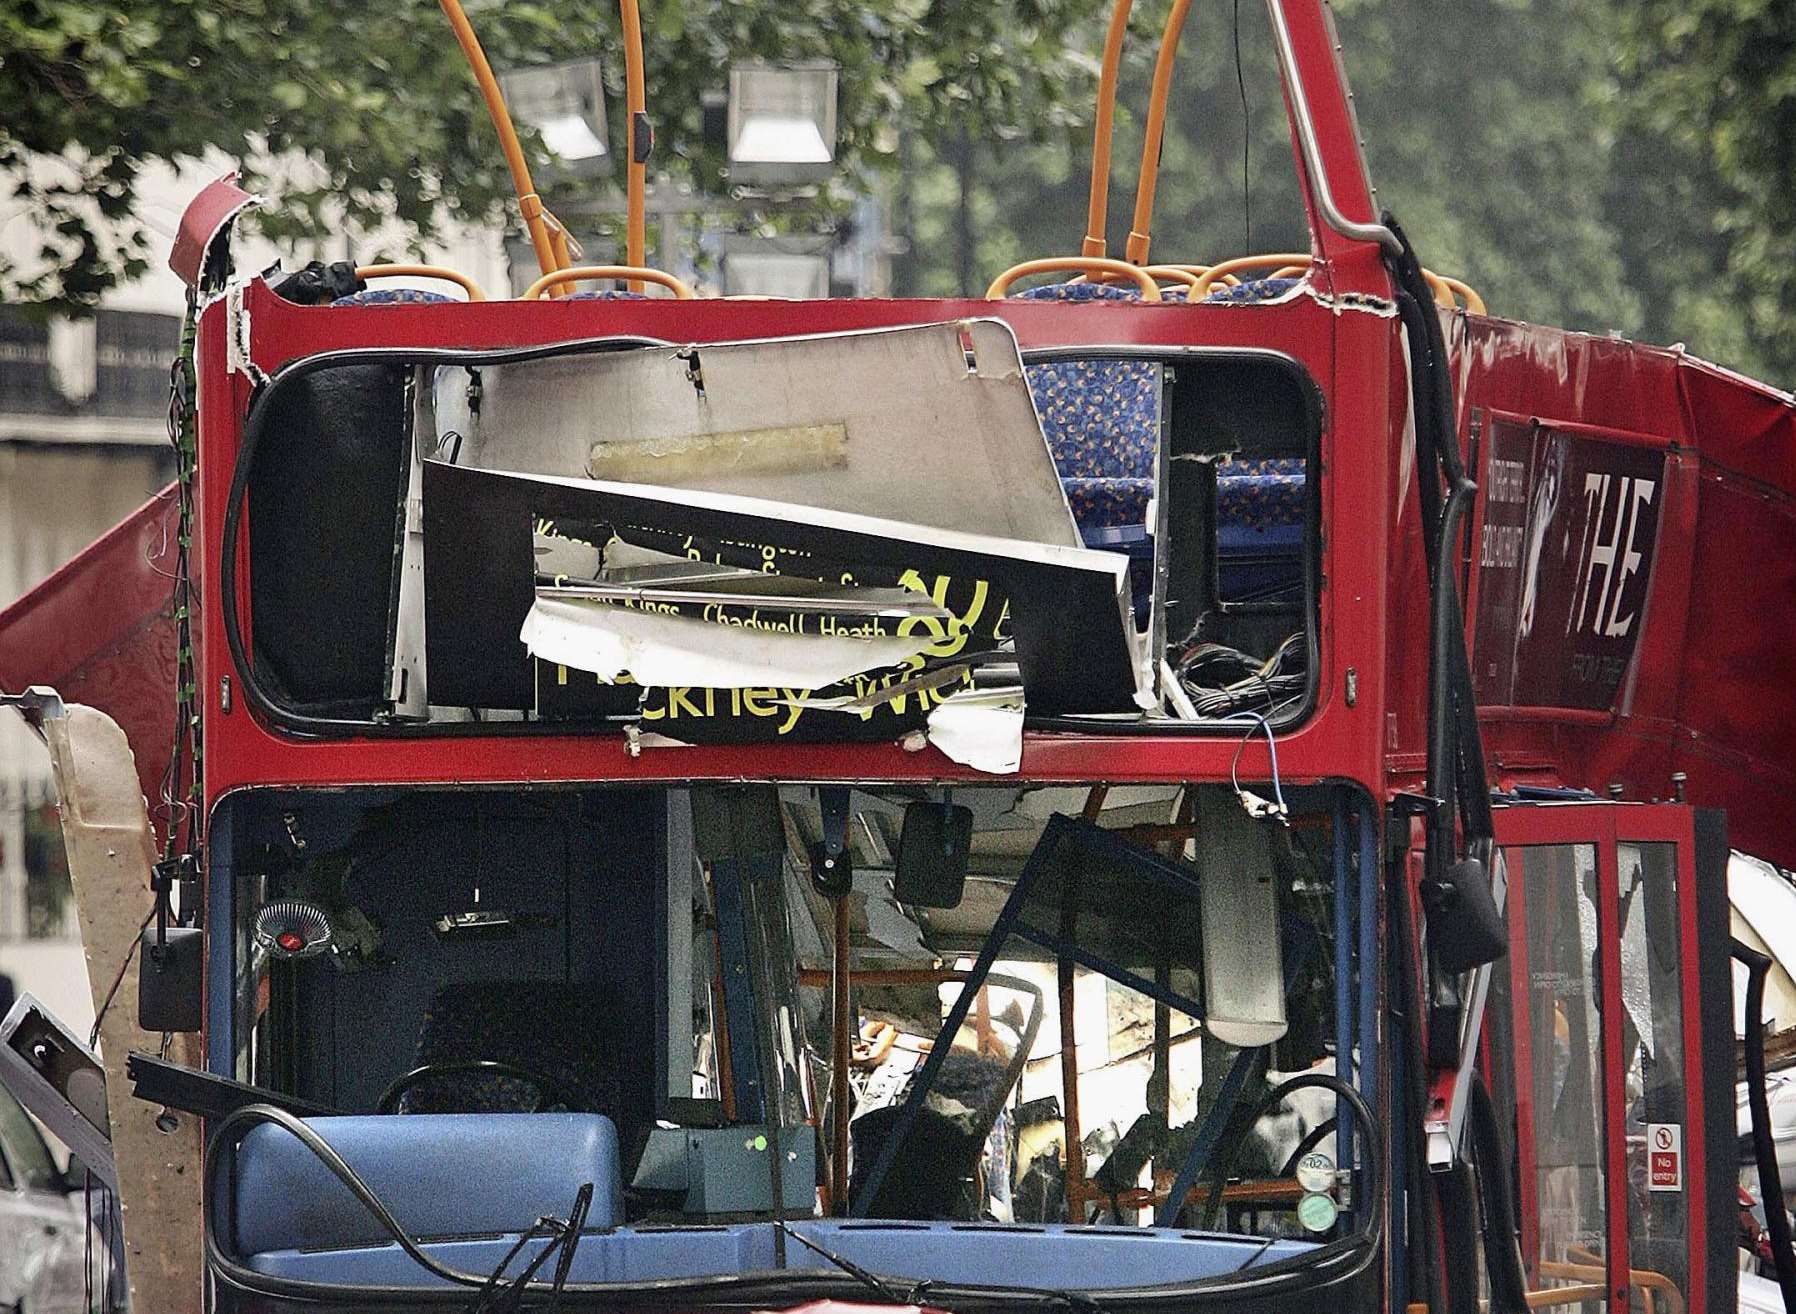 The number 30 double-decker bus which was blown up in London's Tavistock Square by a terrorist bomb. Picture by Empics.